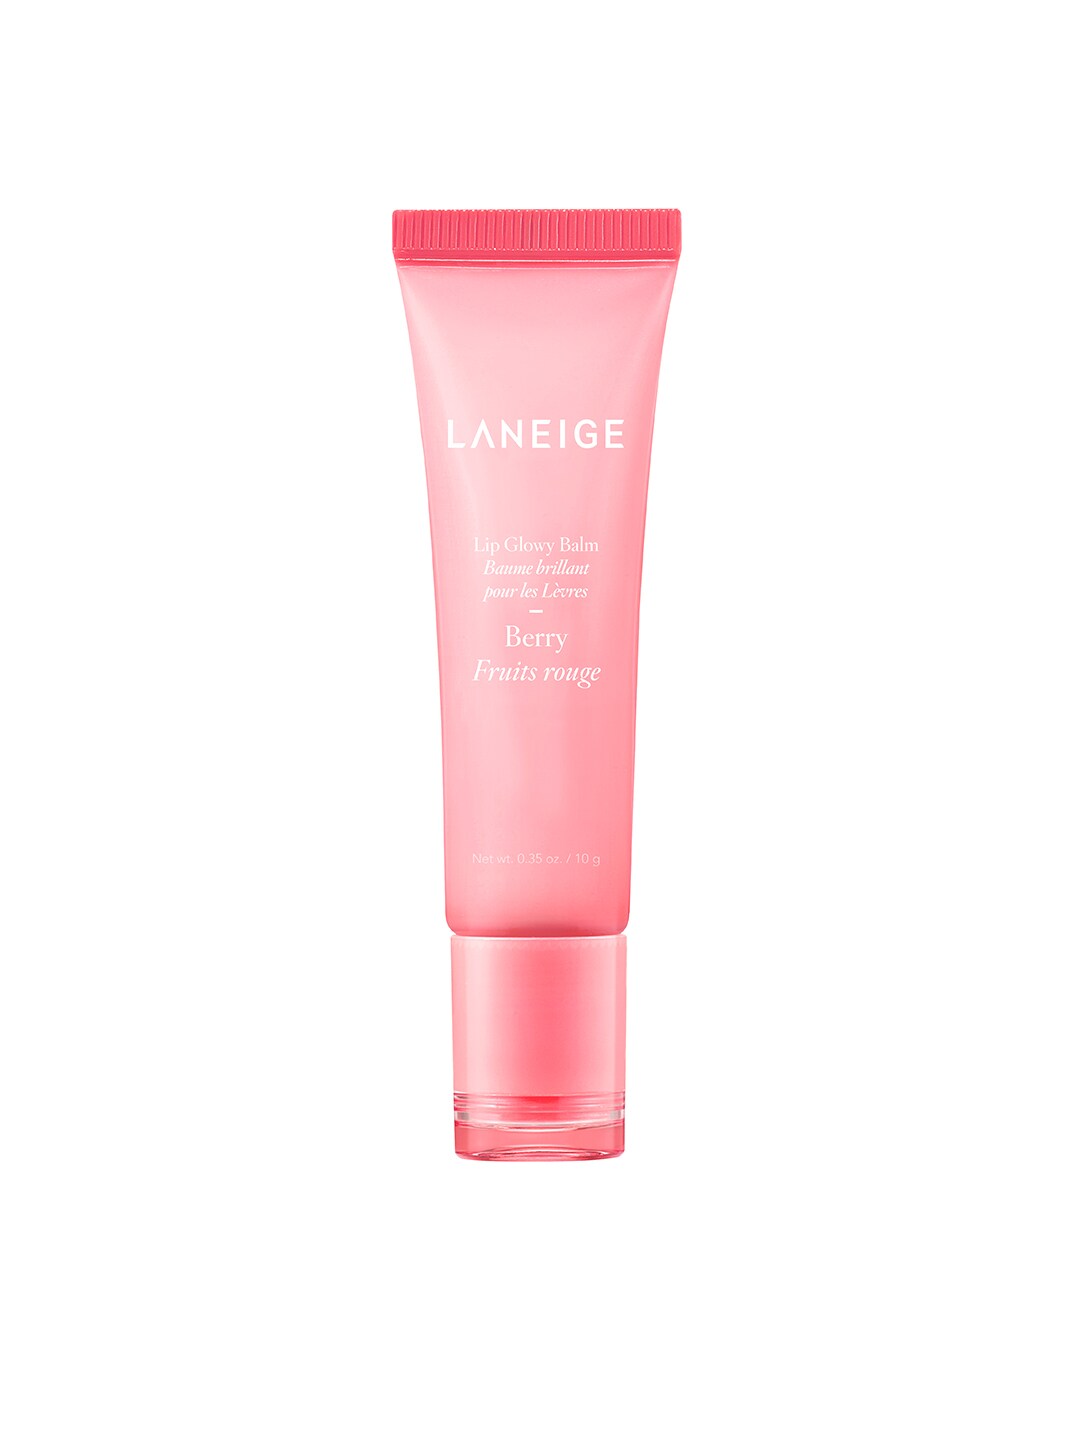 LANEIGE Lip Glowy Balm - Berry Fruits Rouge Price in India